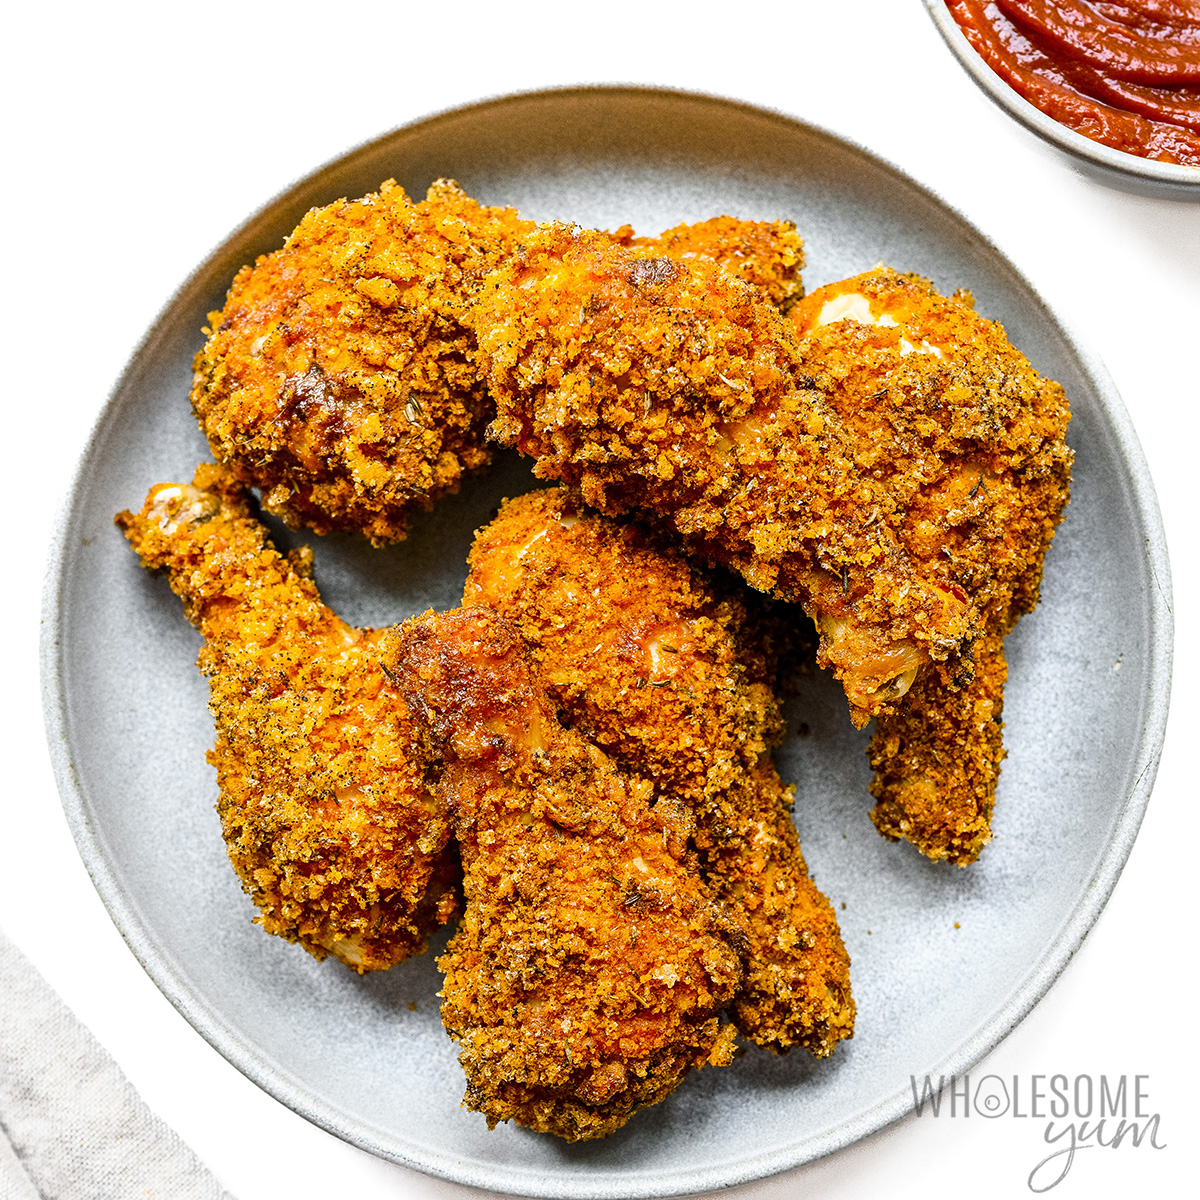 Keto fried chicken on a plate